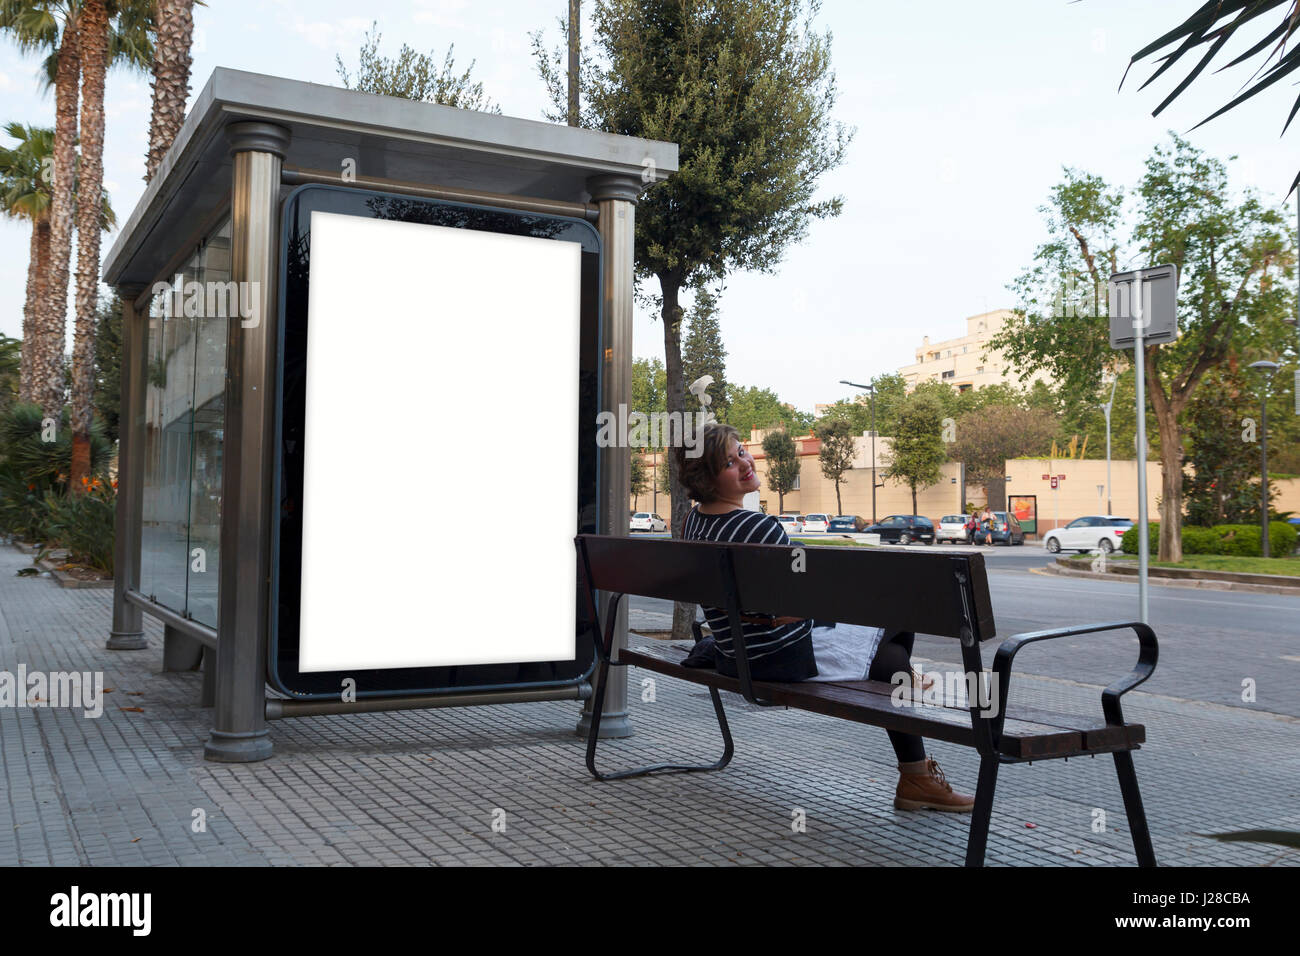 Blank billboard mock up, with a young woman sitting in a bench Stock Photo